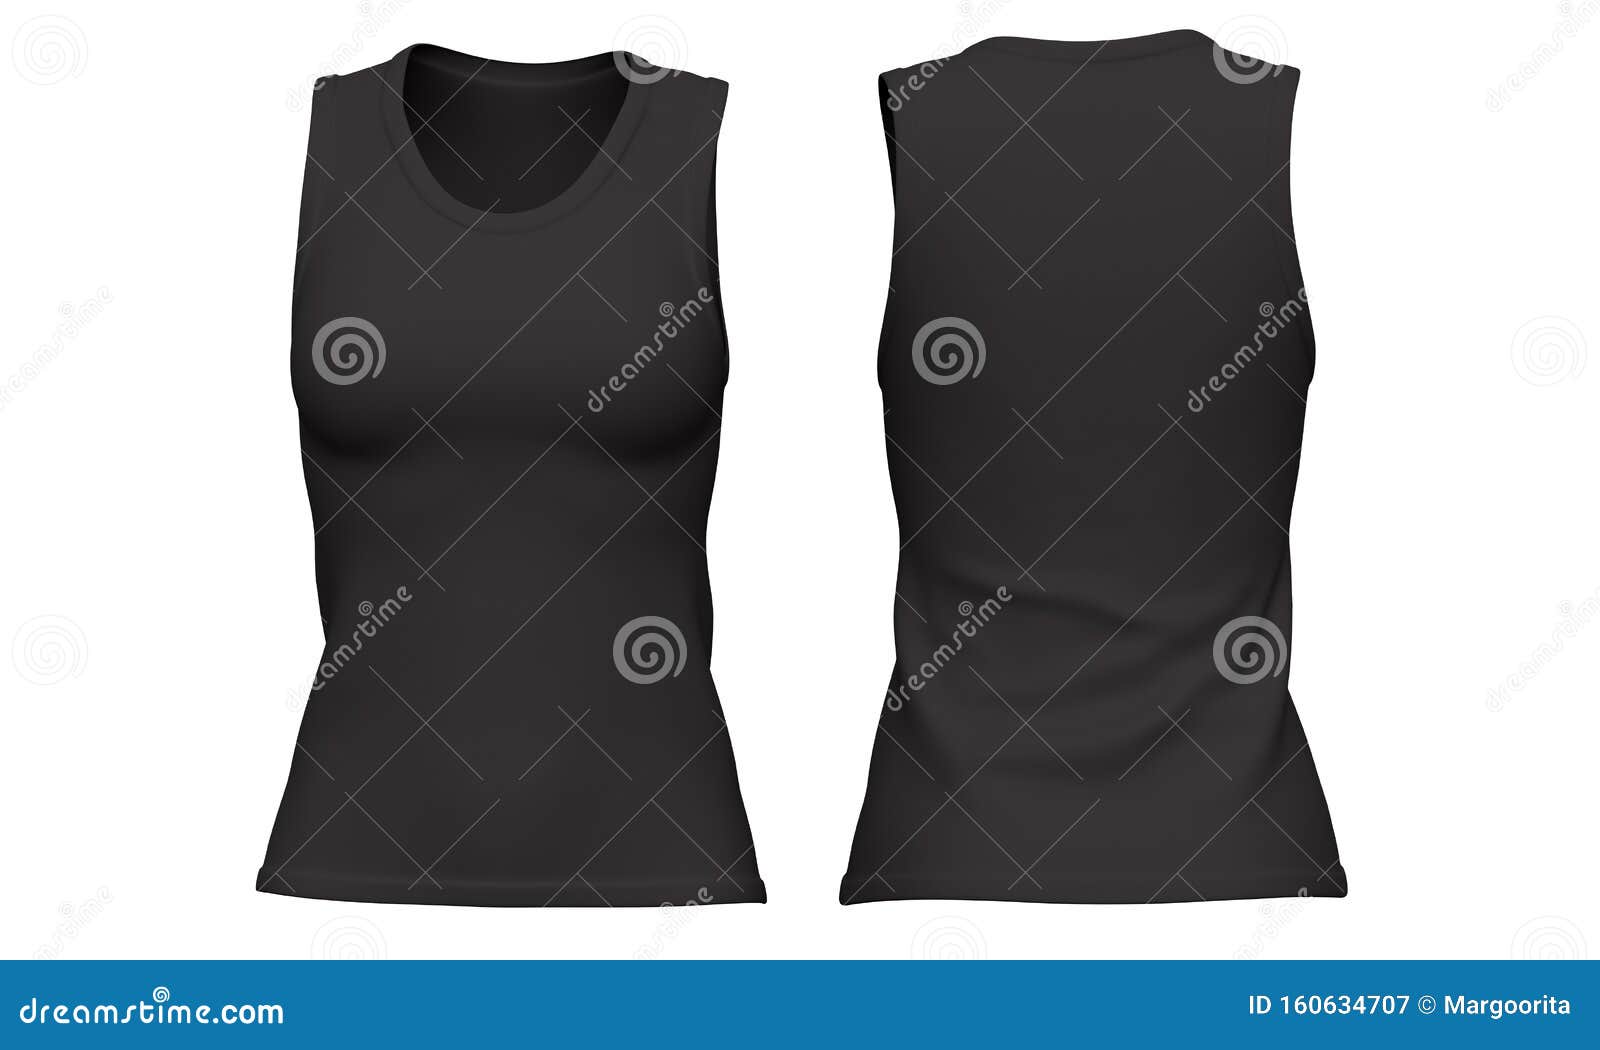 Download Mockup Black Woman Sleeveless T-shirt Isolated On White ...